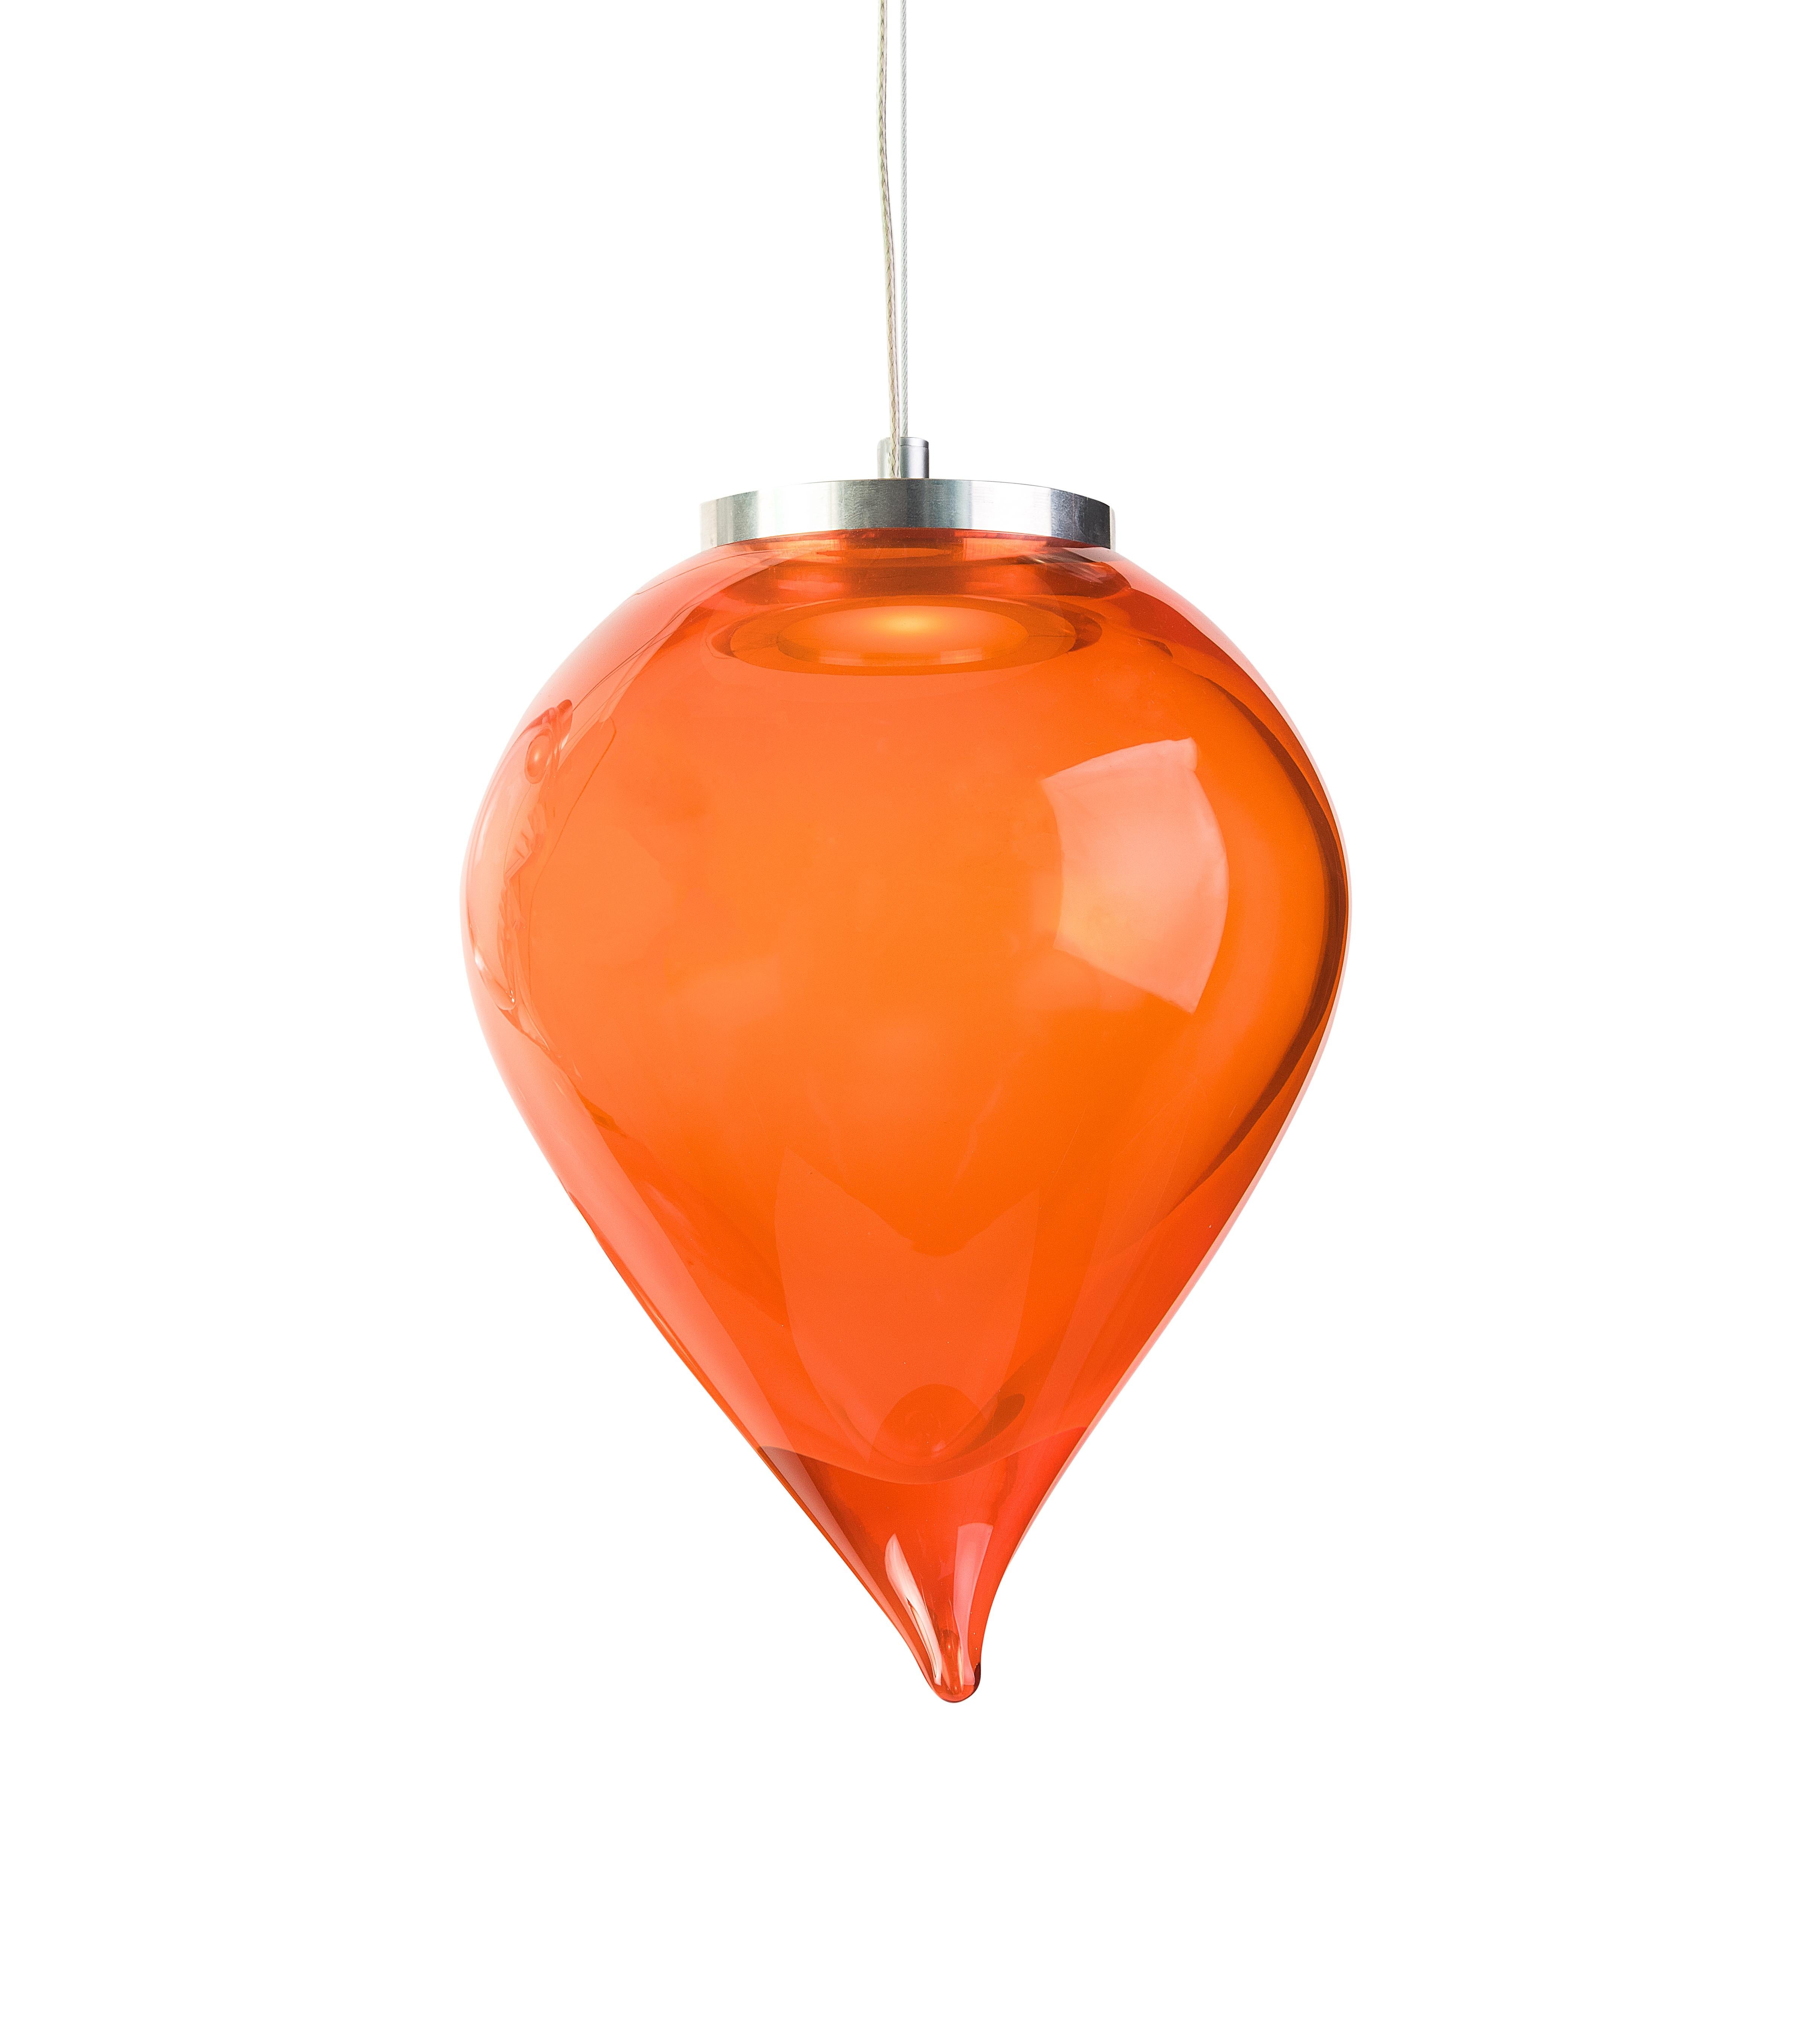 21st century Karim Rashid Flik suspension lamp Murano glass various colors
Karim Rashid has designed Flik for Purho, a lamp which by the designer’s definition is “forged by fire but resembling a drop of water”. A demonstration that the clash